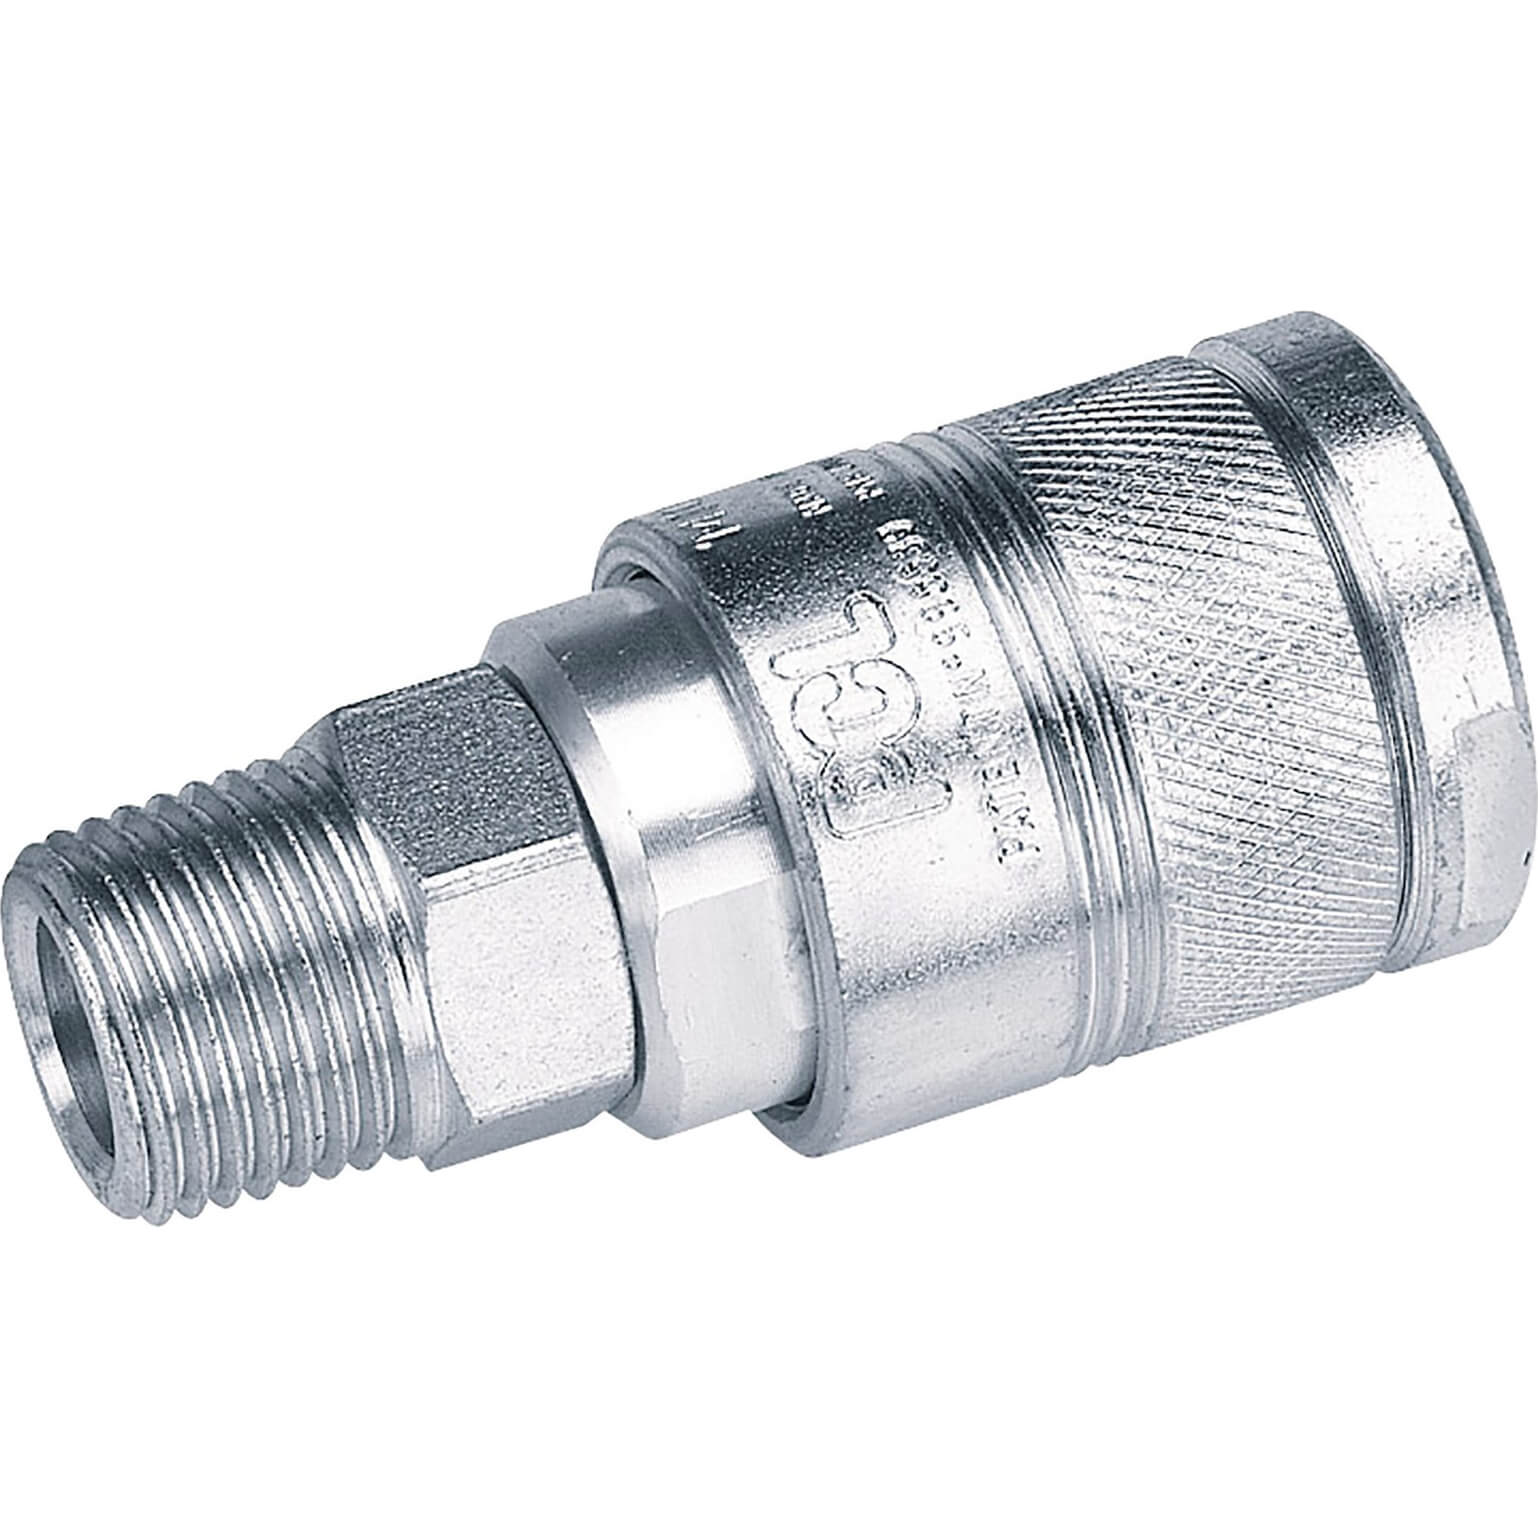 Photos - Equipment Accessory Draper PCL M100 Air Line Coupling Male Thread 1/2" BSP Pack of 1 